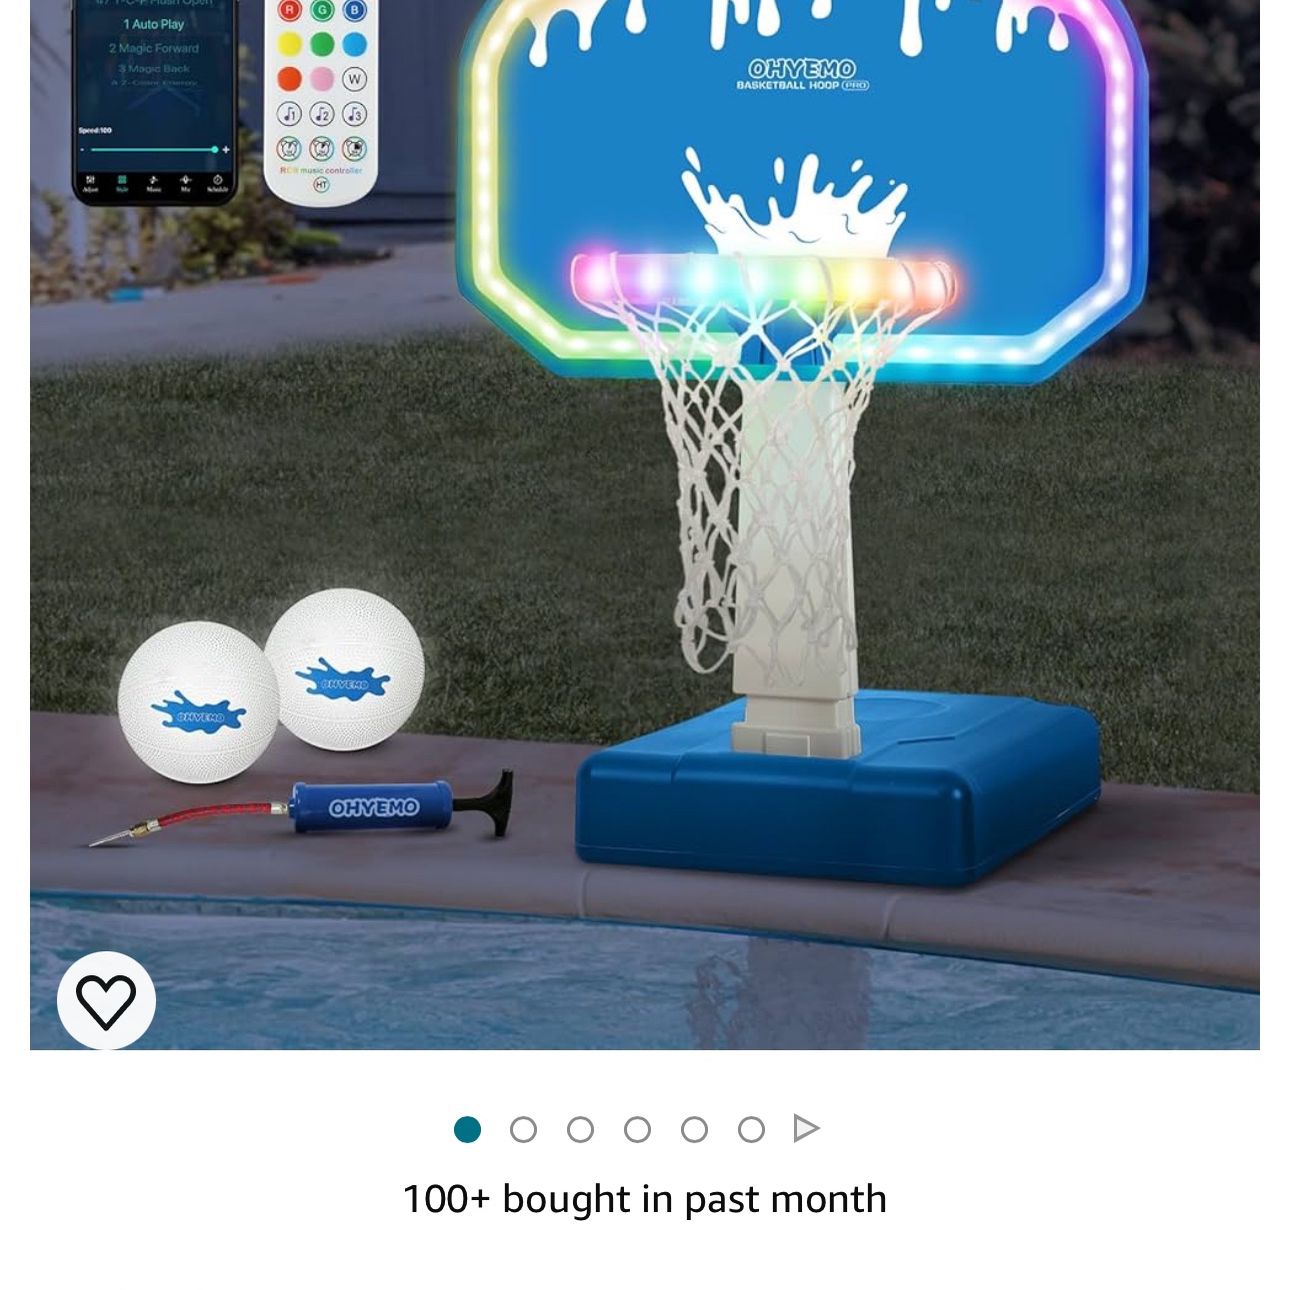 OHYEMO LED Pool Basketball Game Set, Light Up Swimming Pool Basketball Hoop with 2 LED Water Balls, App & Remote Control, Music & Mic Sync for Ingroun